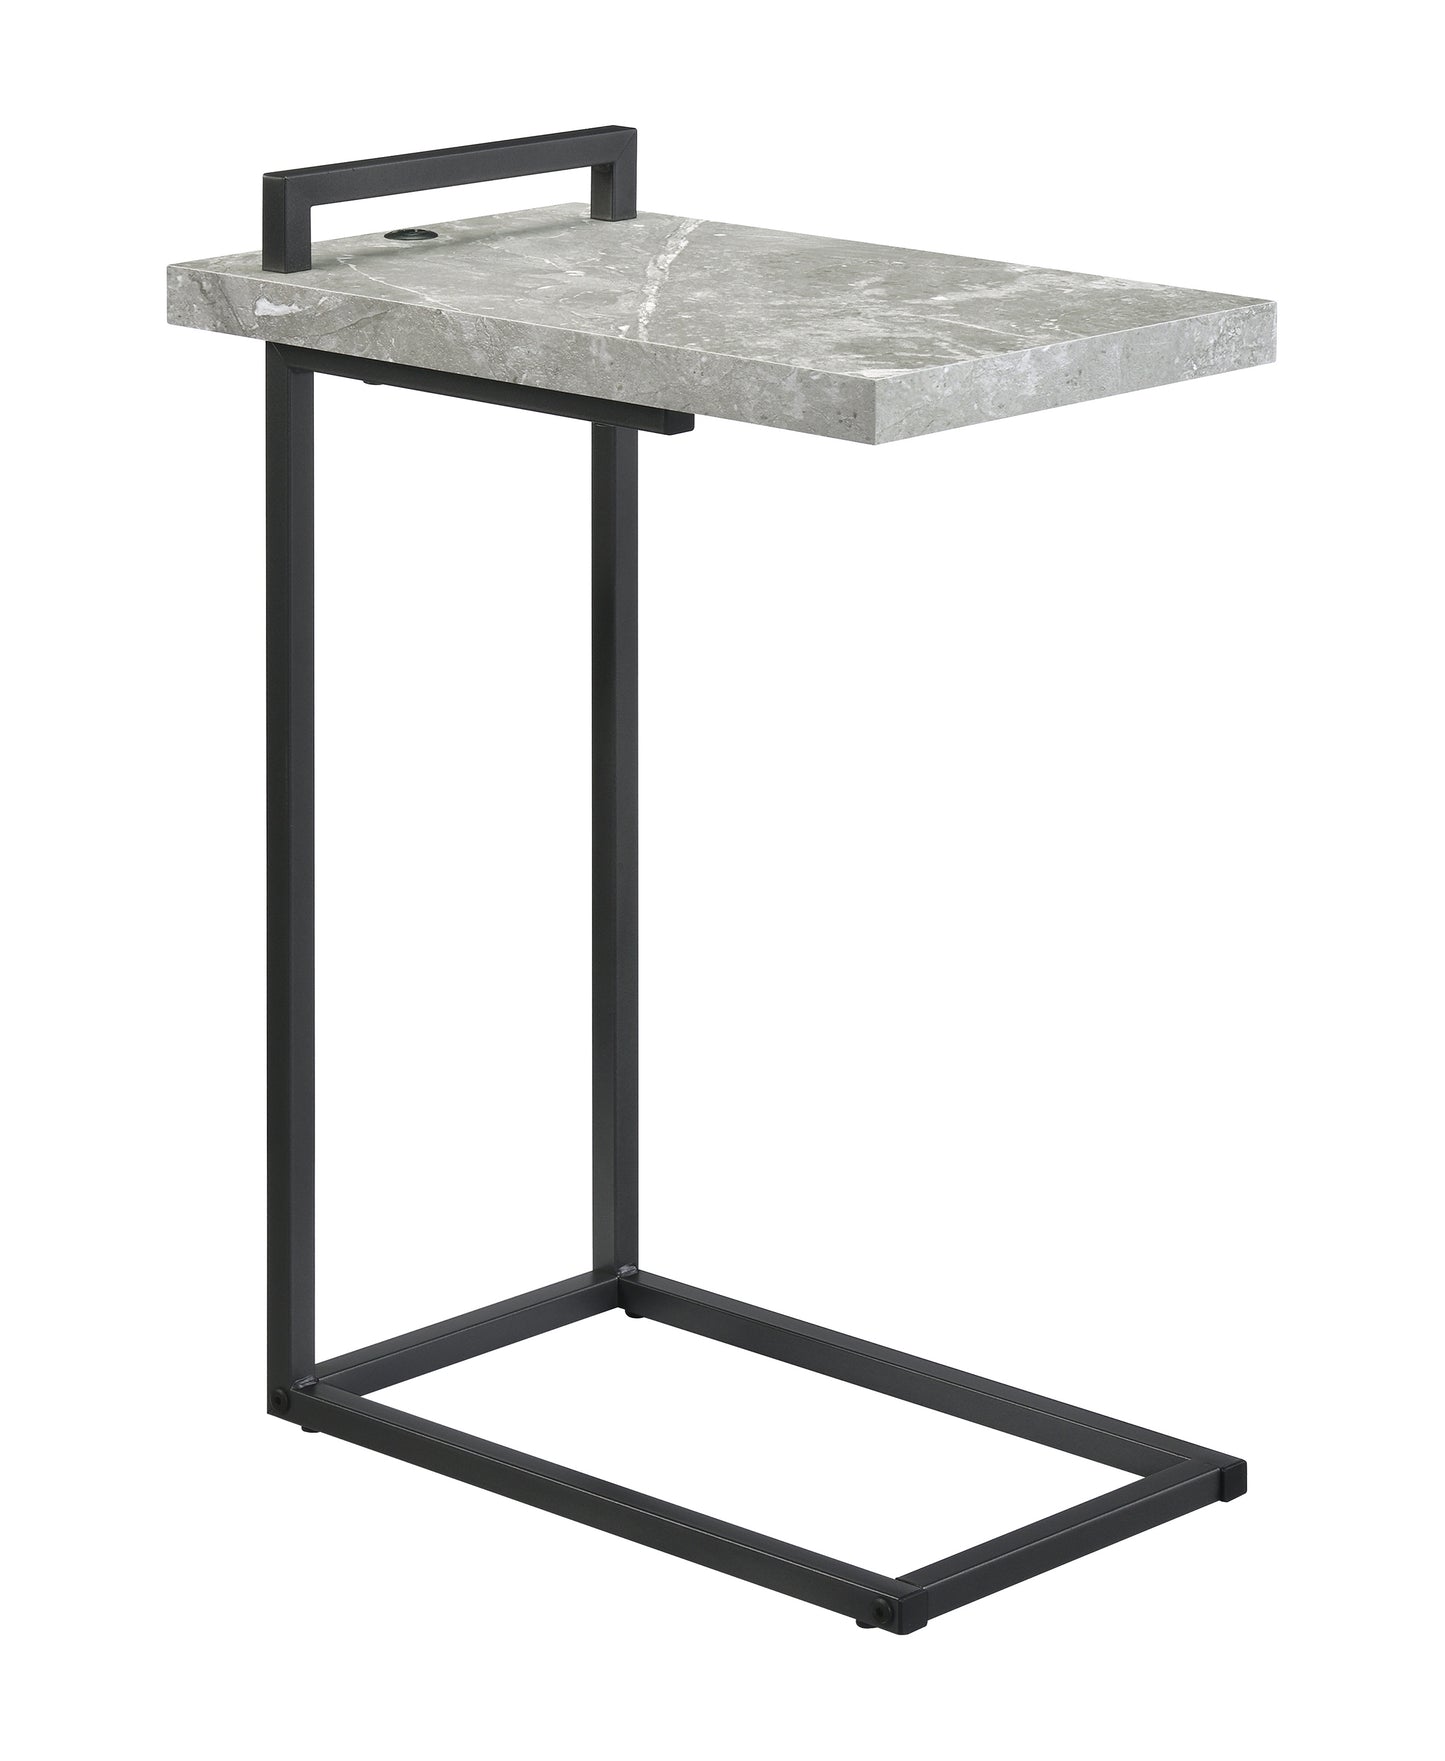 C-shaped Accent Table Cement and Gunmetal